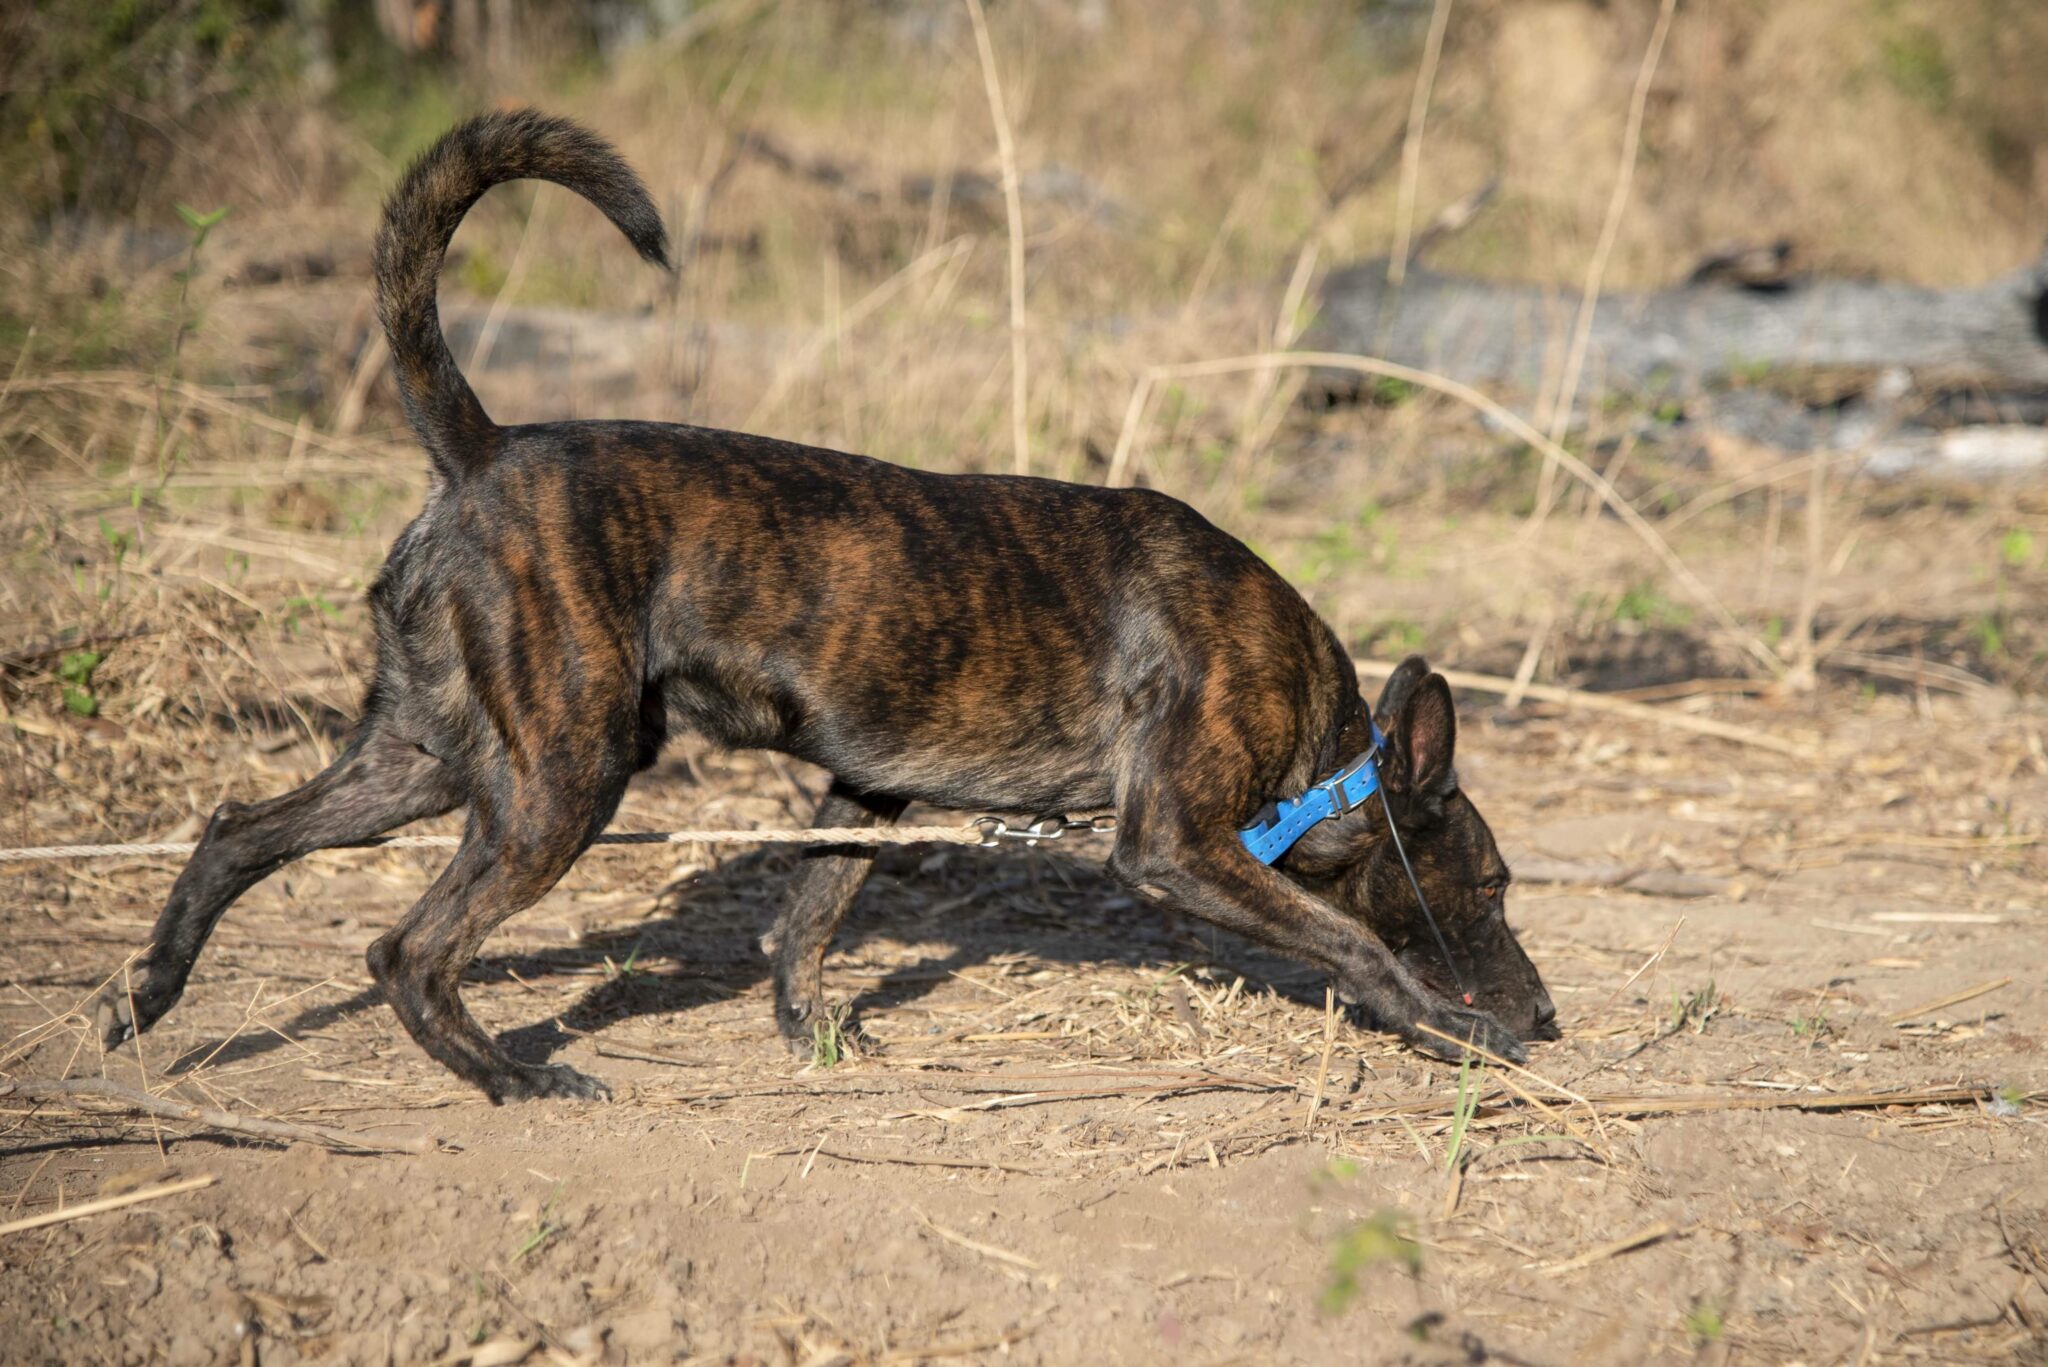 Technical Survey Dog Mannes searches for explosives on a long leash.